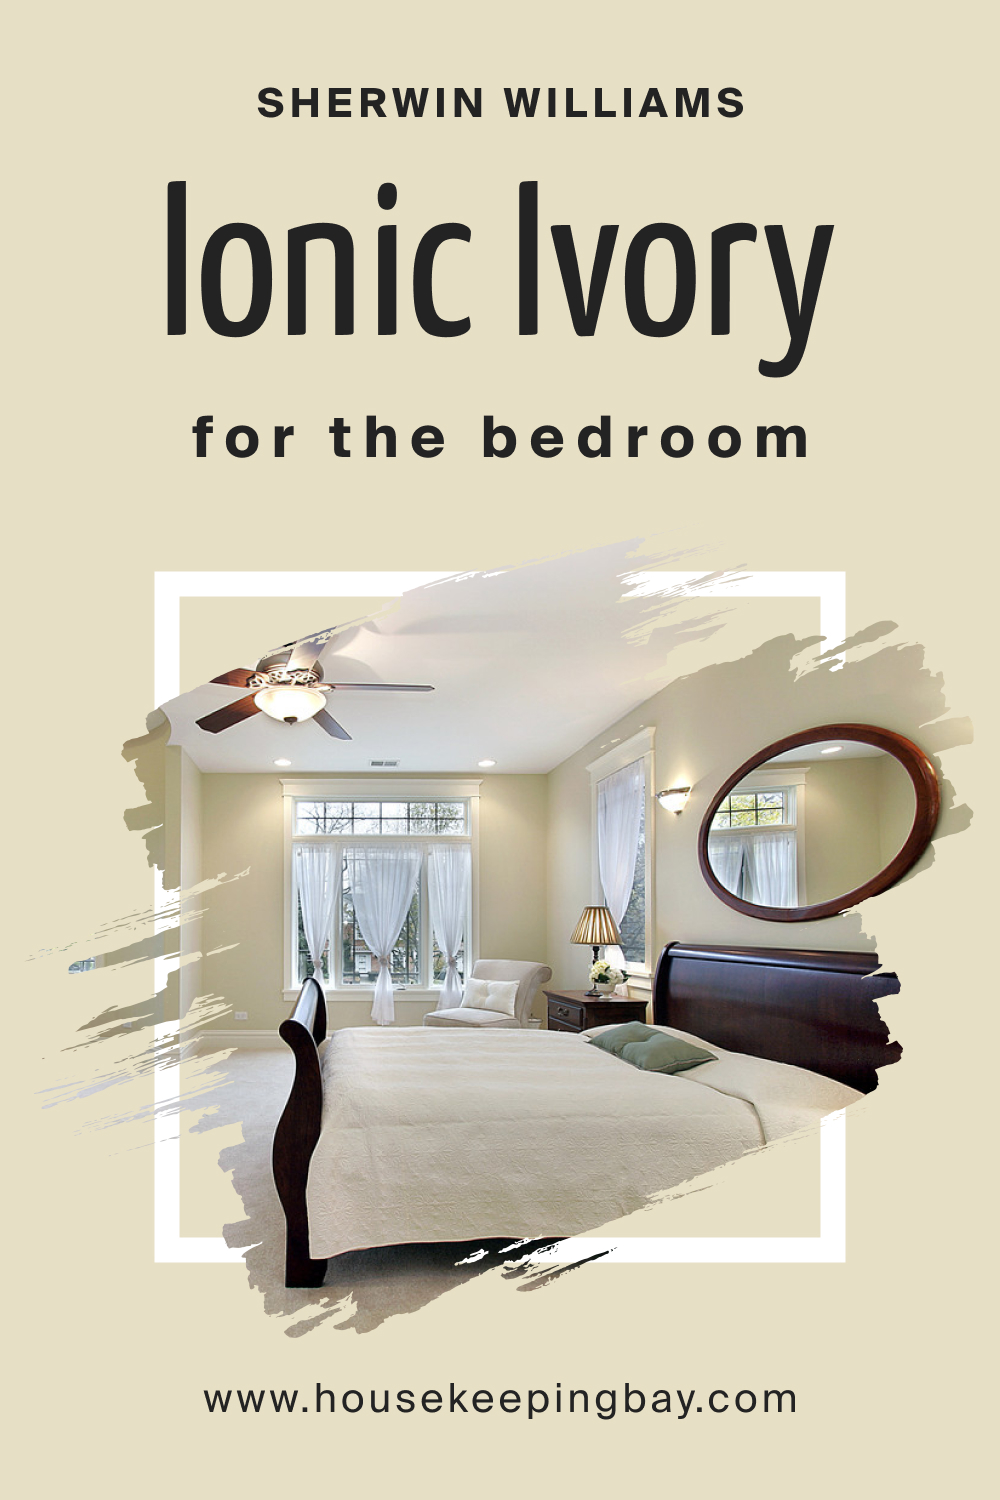 Sherwin Williams. SW 6406 Ionic Ivory For the bedroom